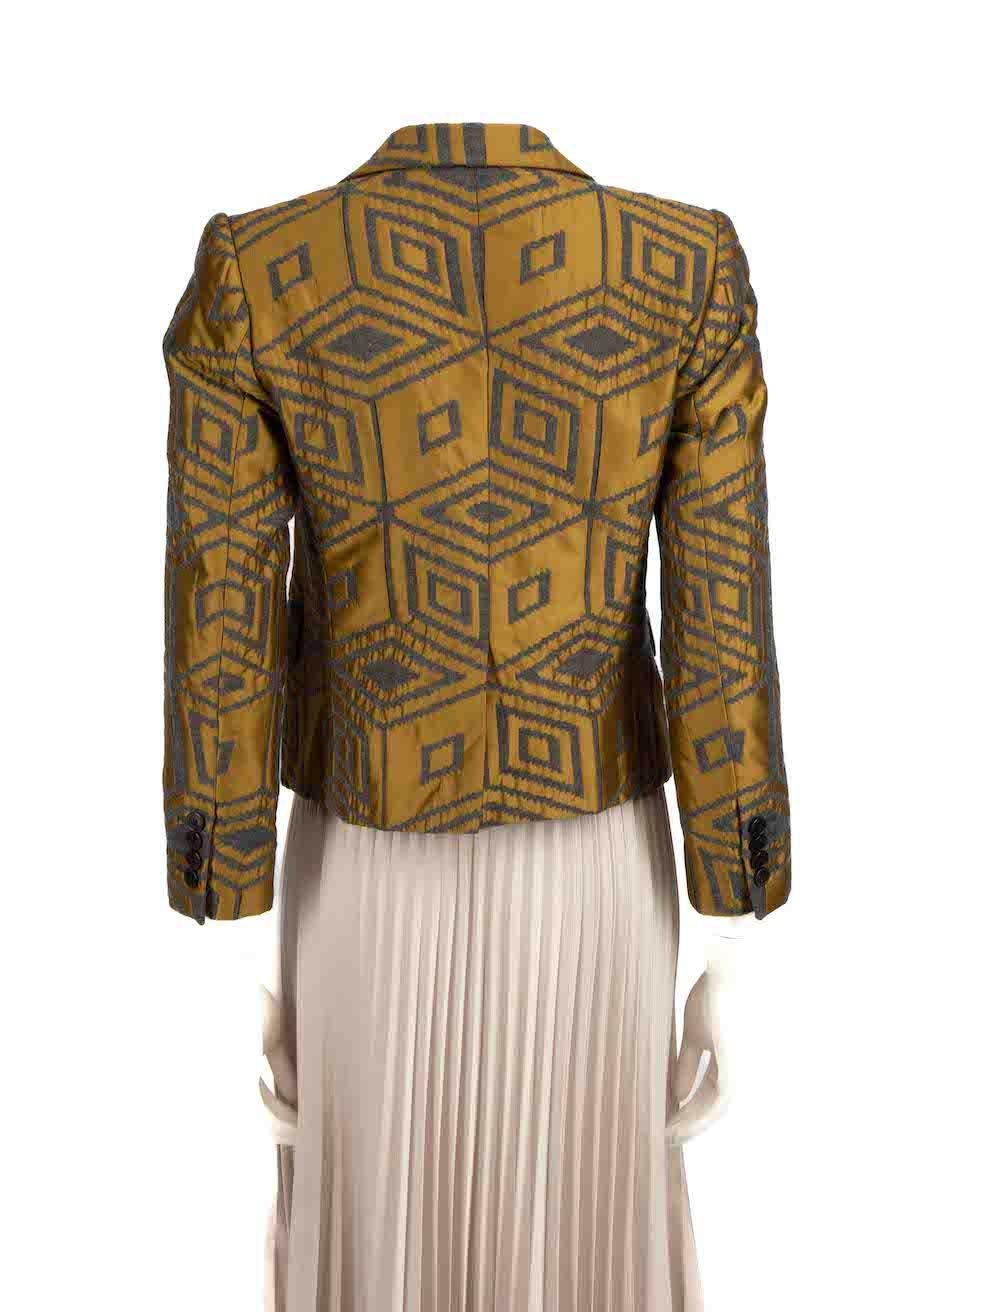 Dries Van Noten Khaki Abstract Jacquard Blazer Size S In Good Condition For Sale In London, GB